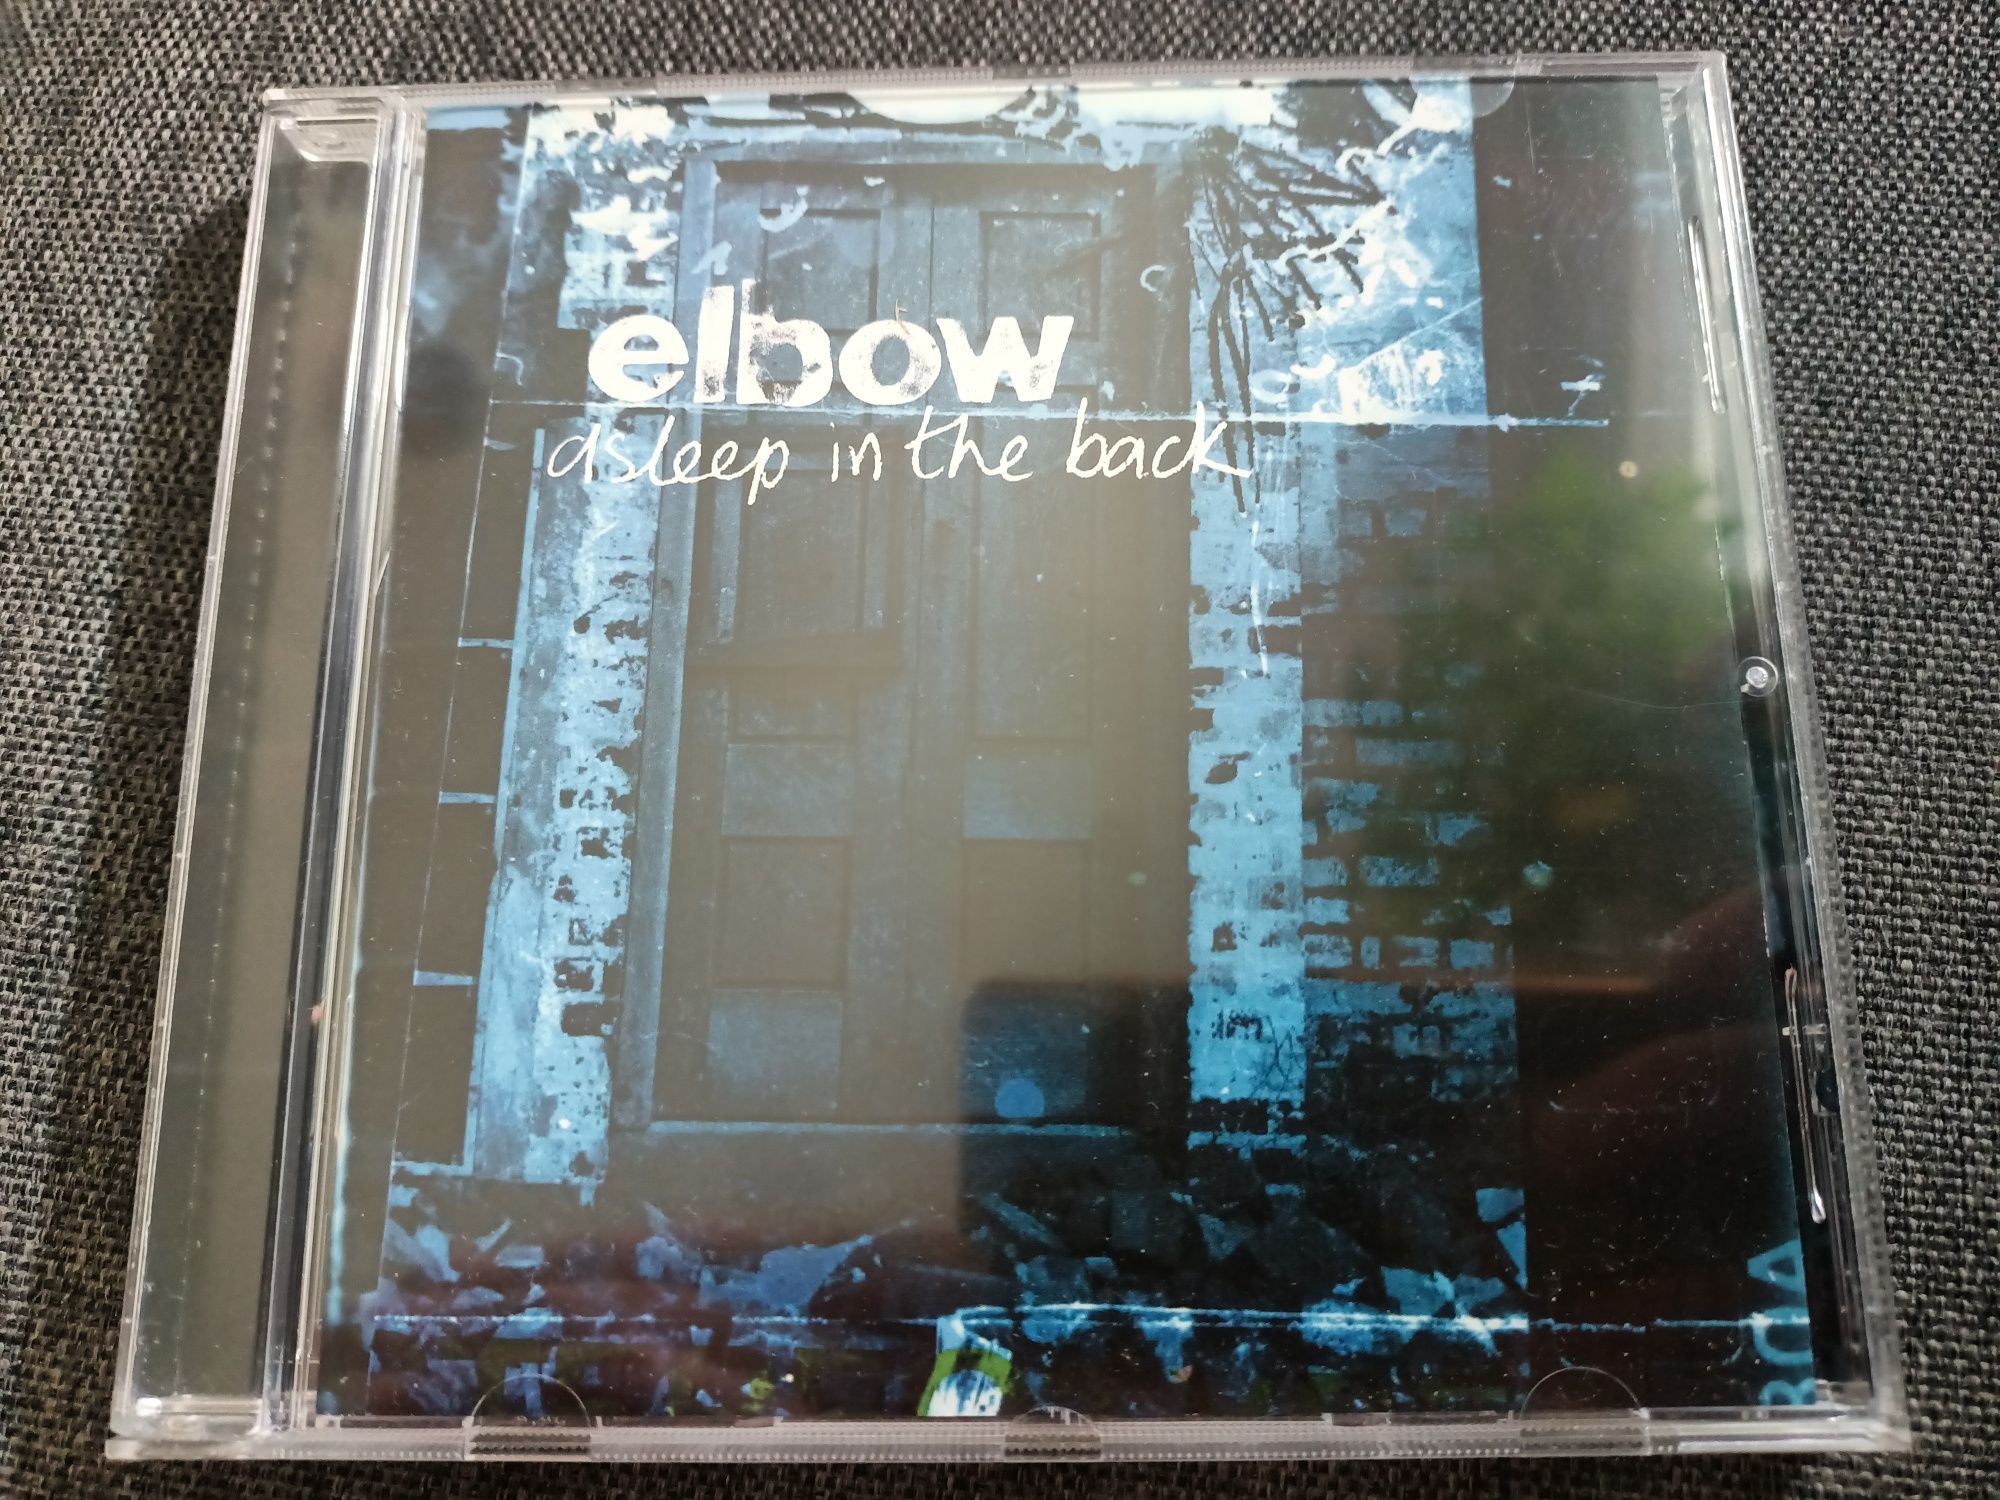 Elbow - Asleep In The Back (vg+)